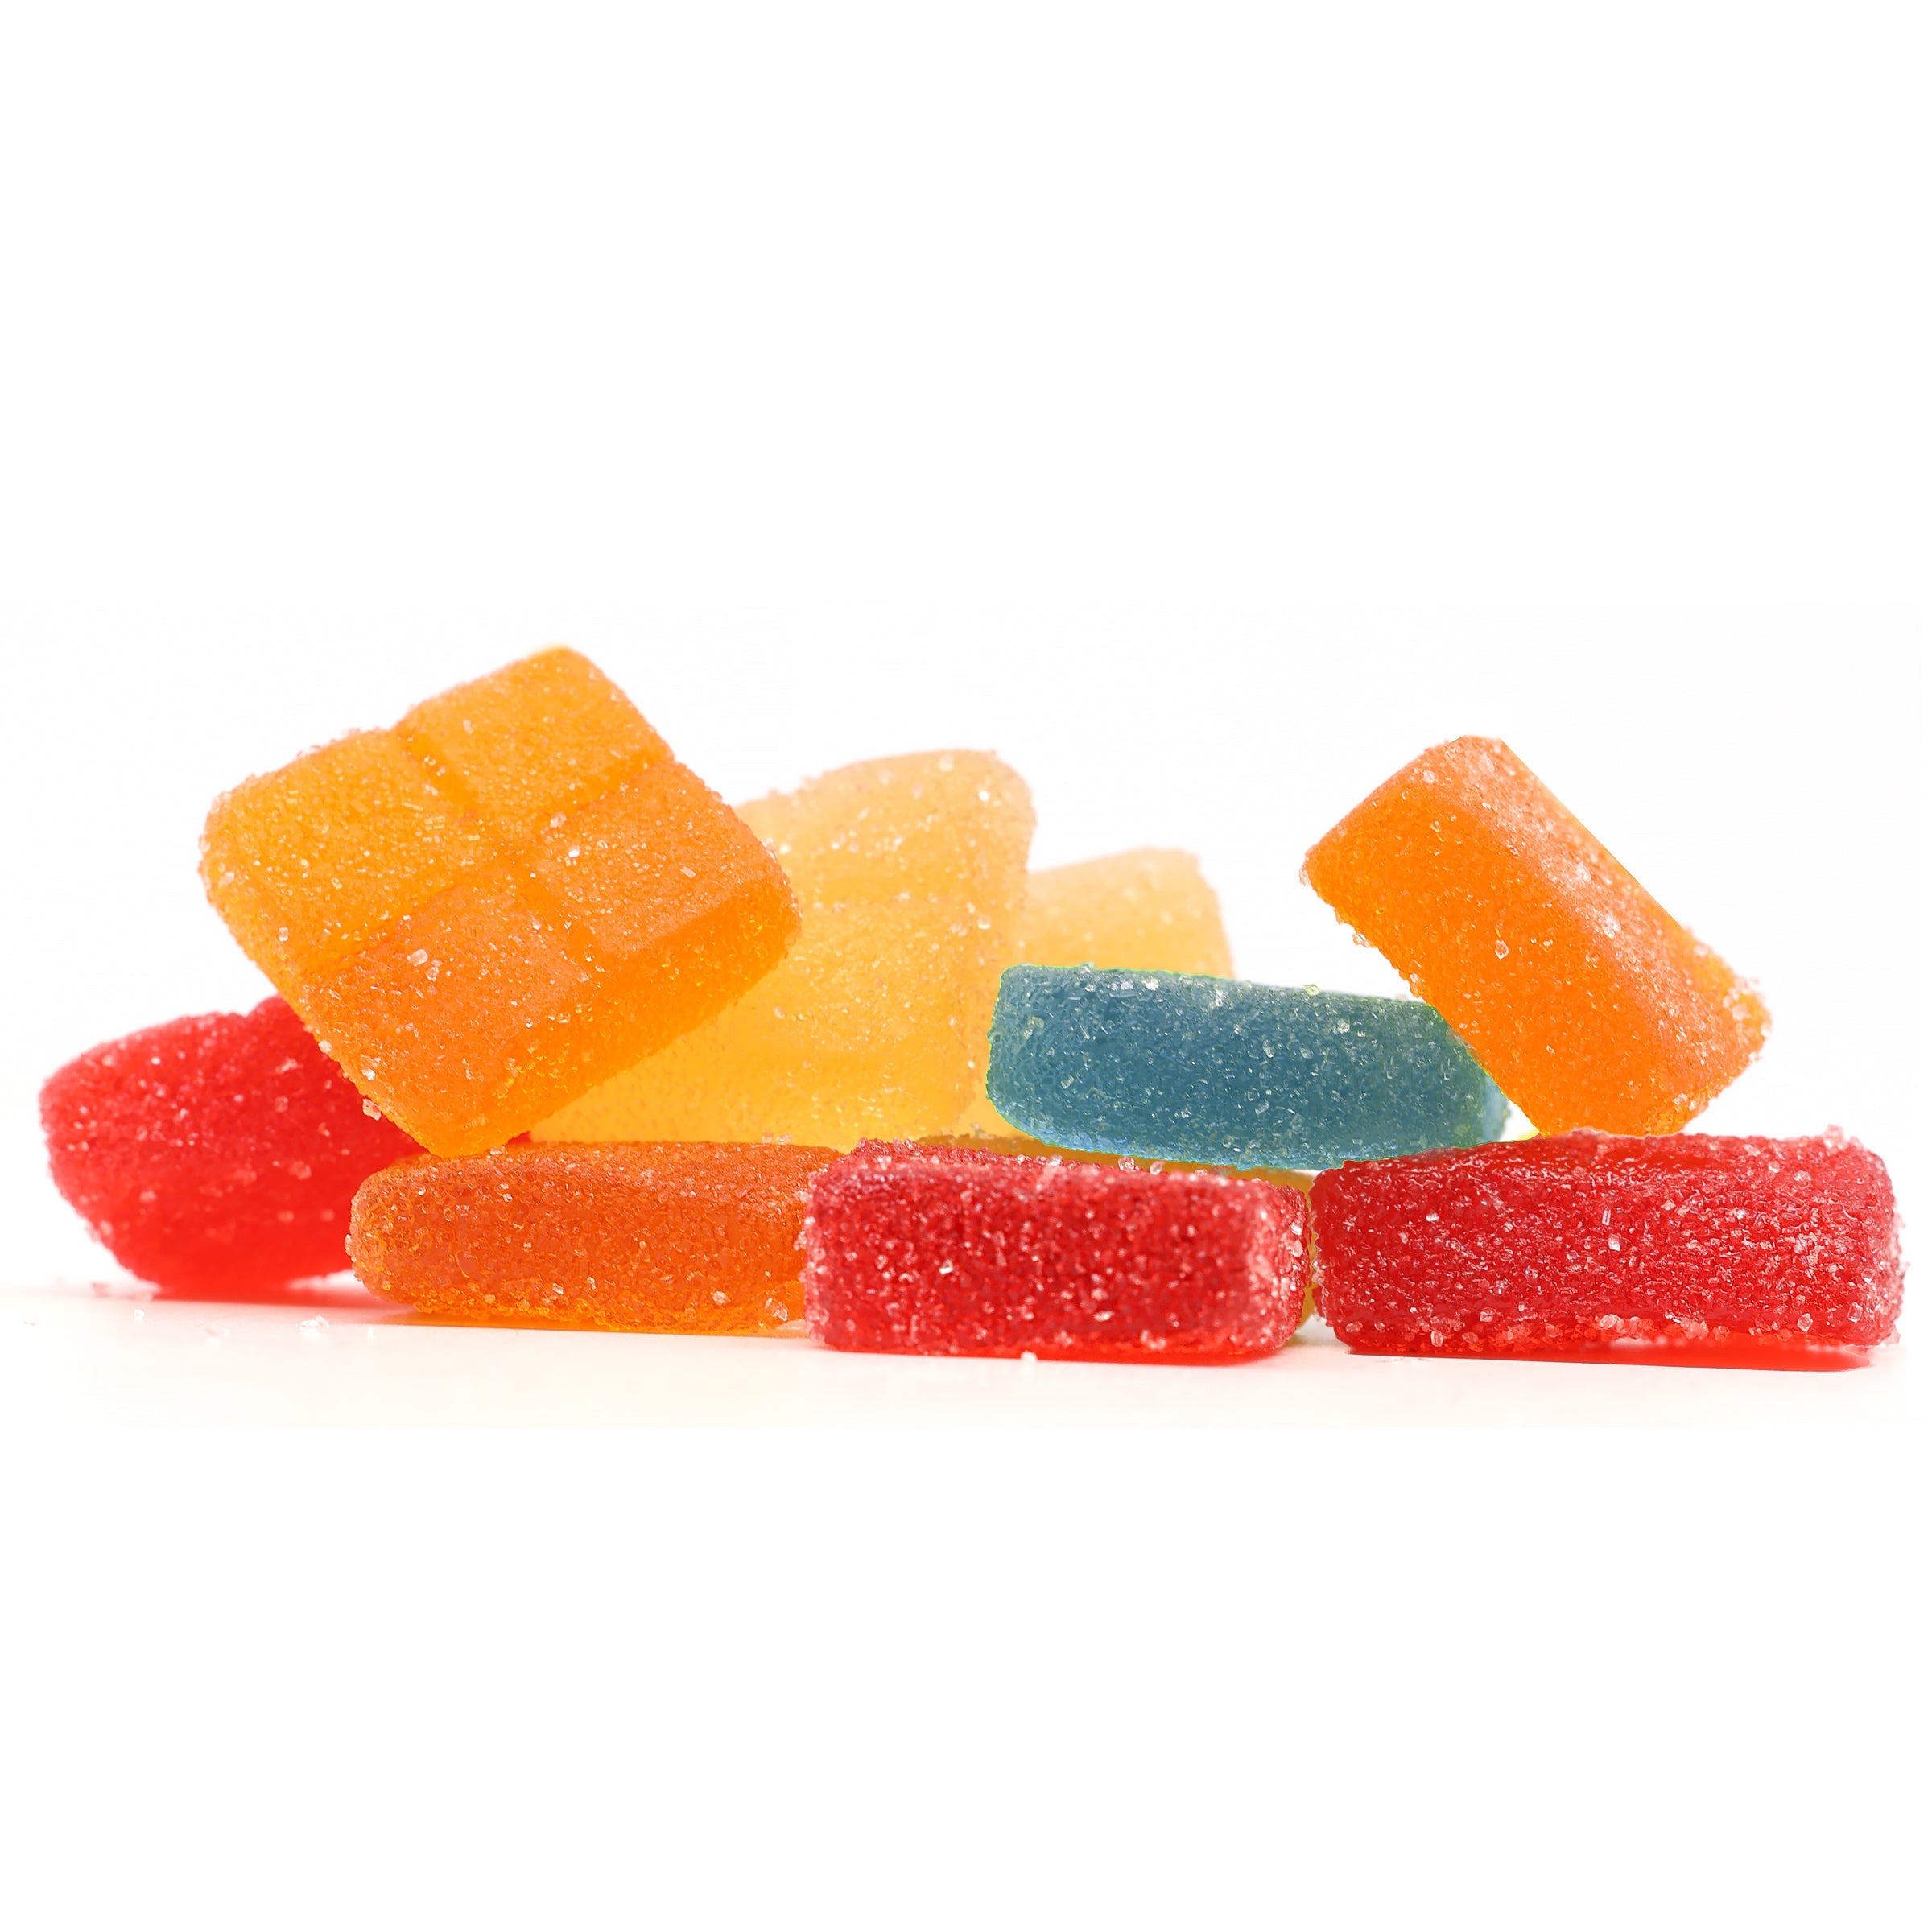 Mango Delta-9 Microdose Gummies: 10 Pack from Botany Farms